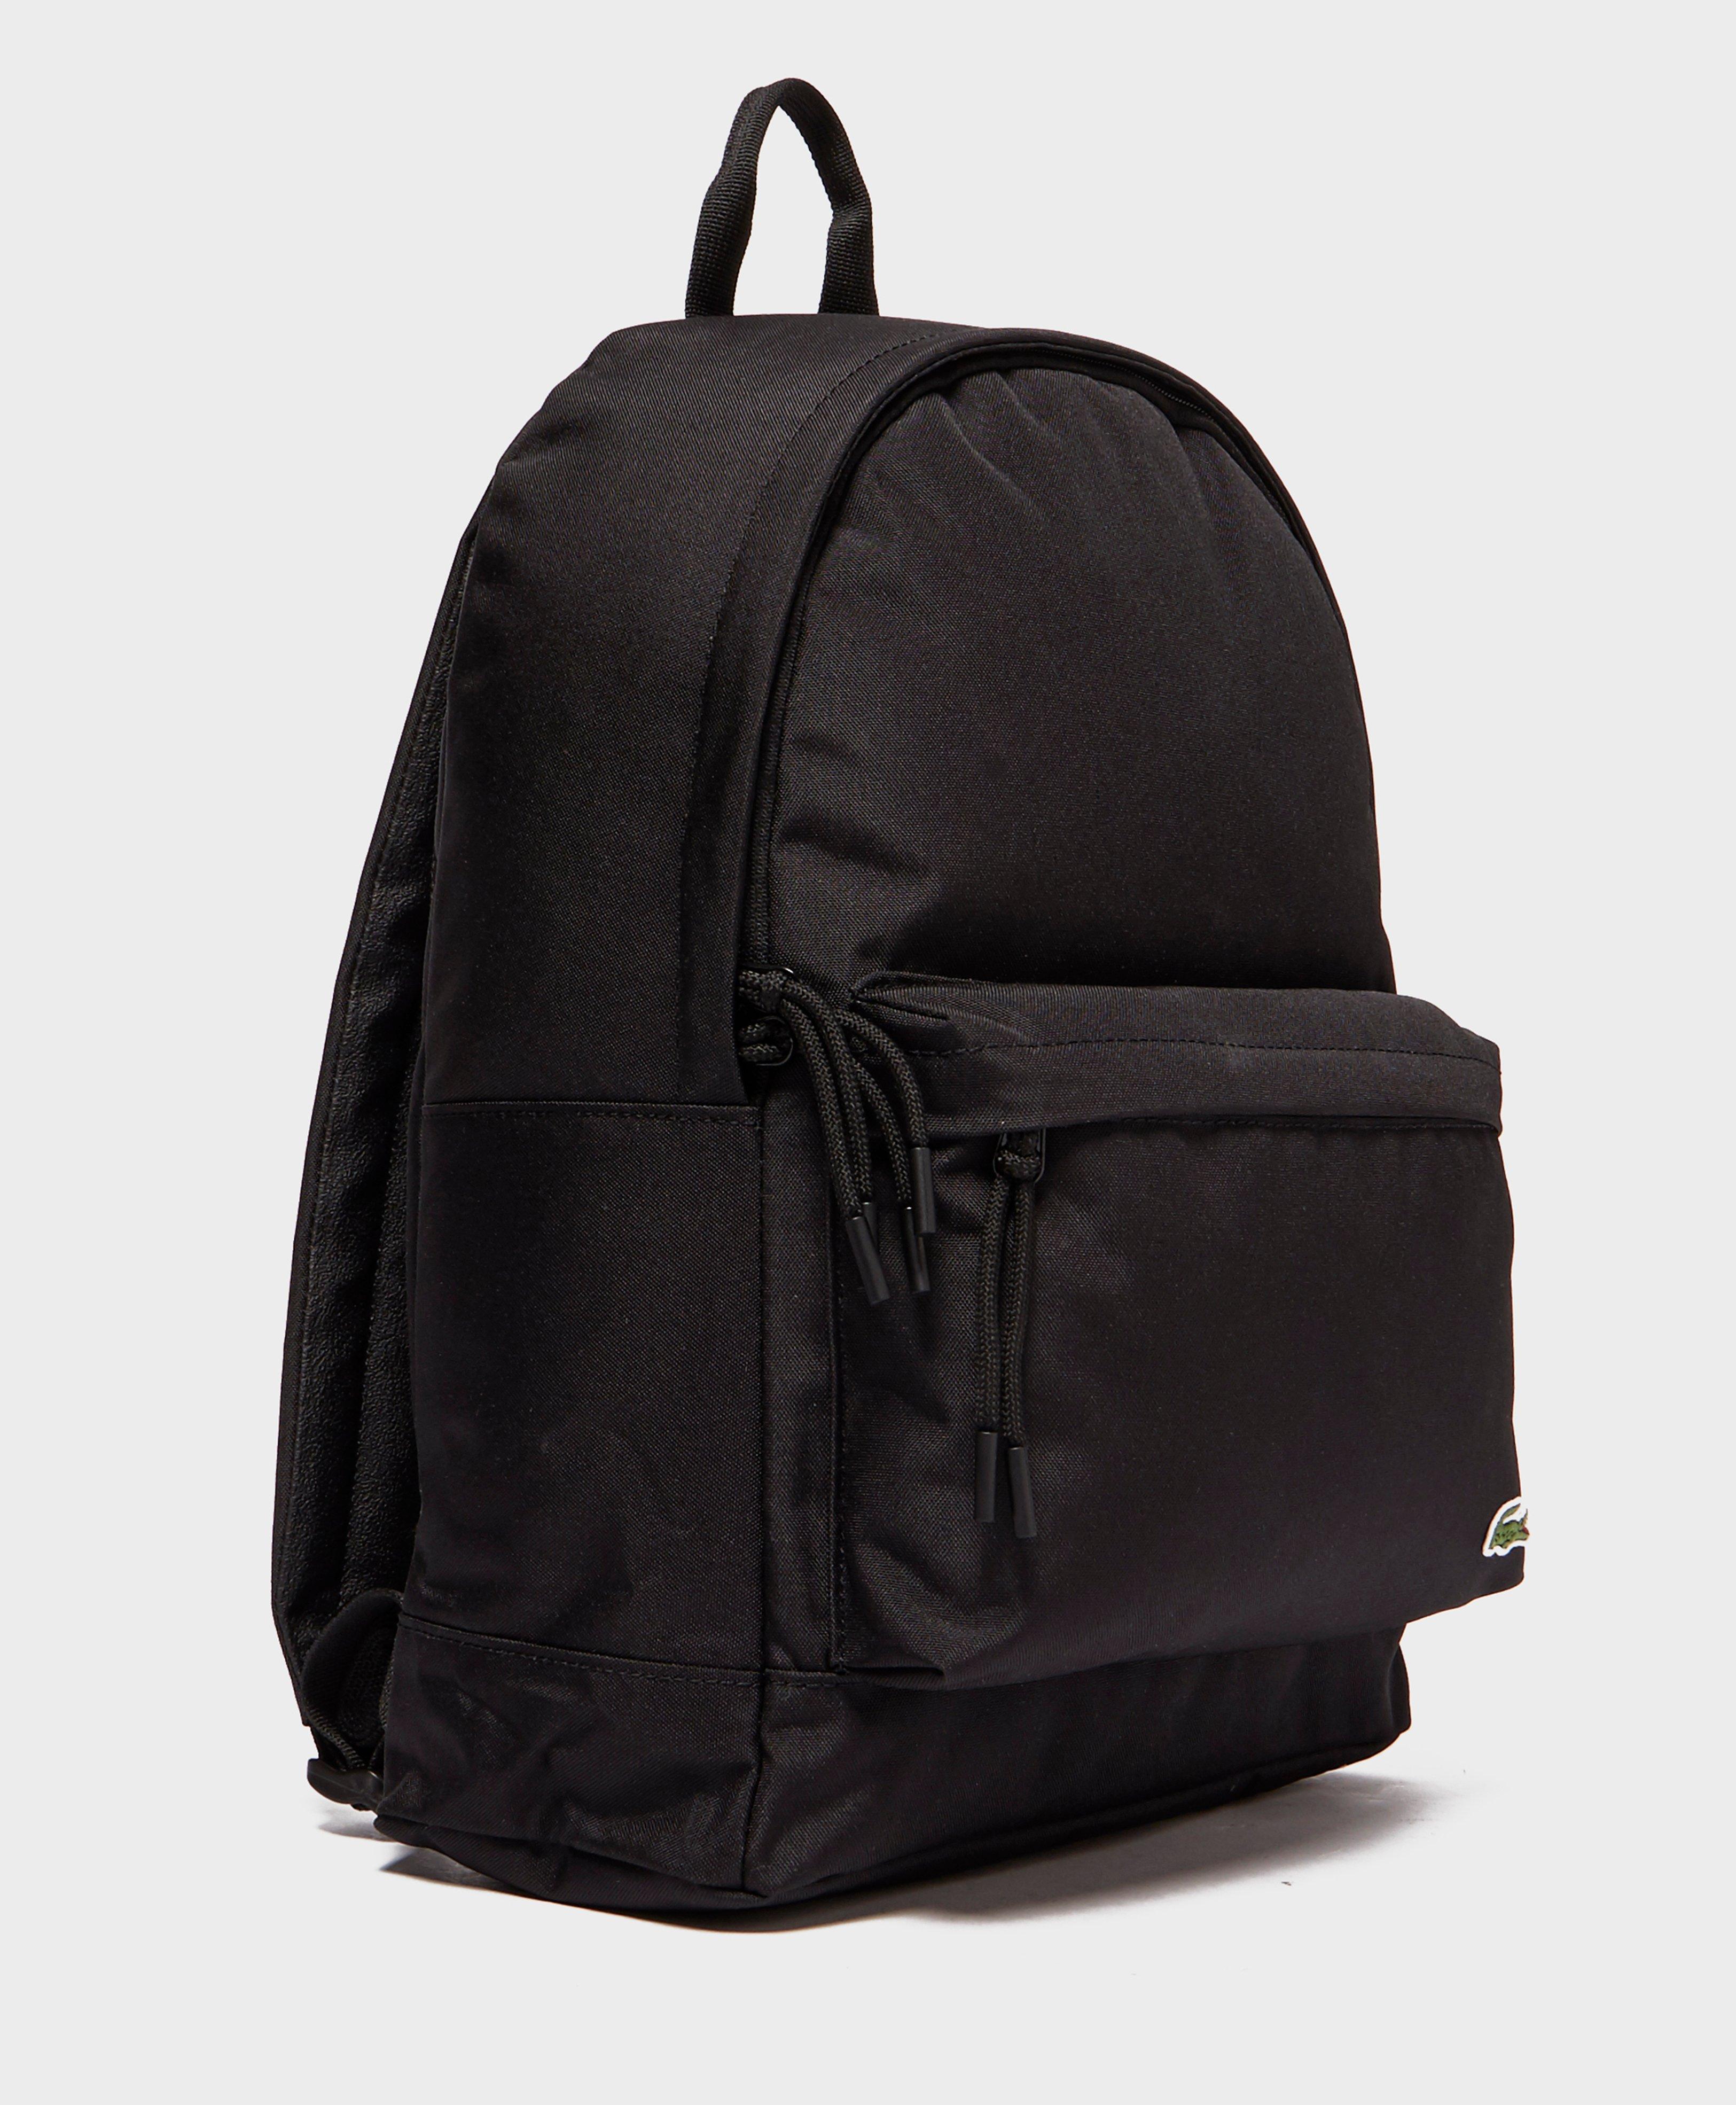 Lacoste Synthetic Backpack in Black for Men - Lyst